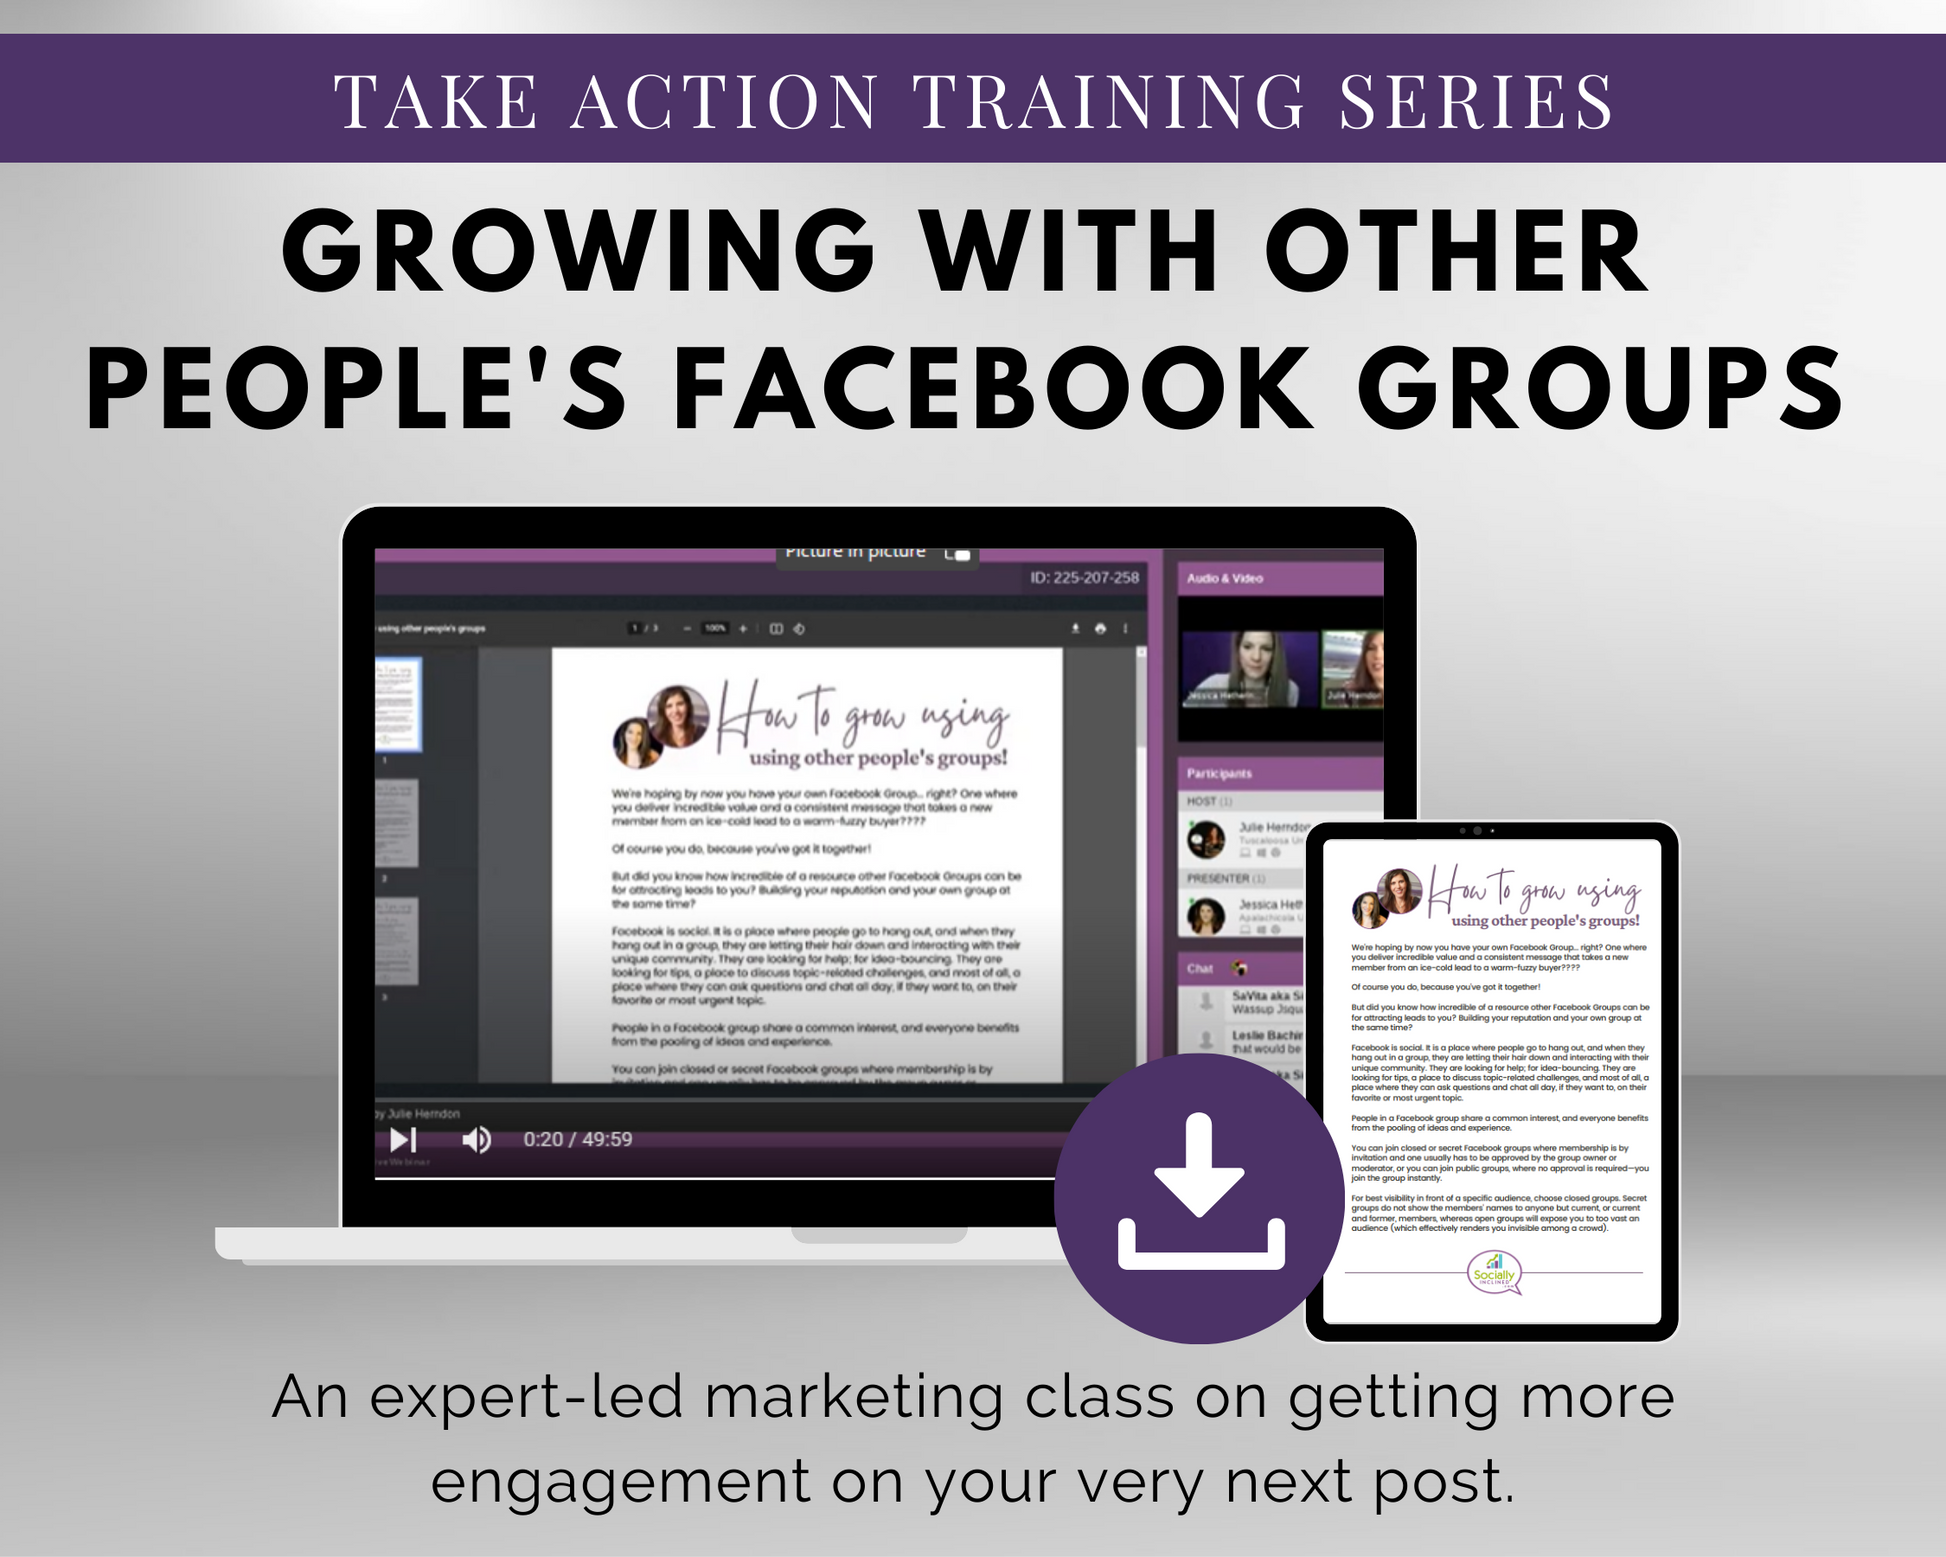 Join our growing TAT - Growing with Other People's Facebook Groups Masterclass by Get Socially Inclined to connect and learn with fellow Facebook group enthusiasts.